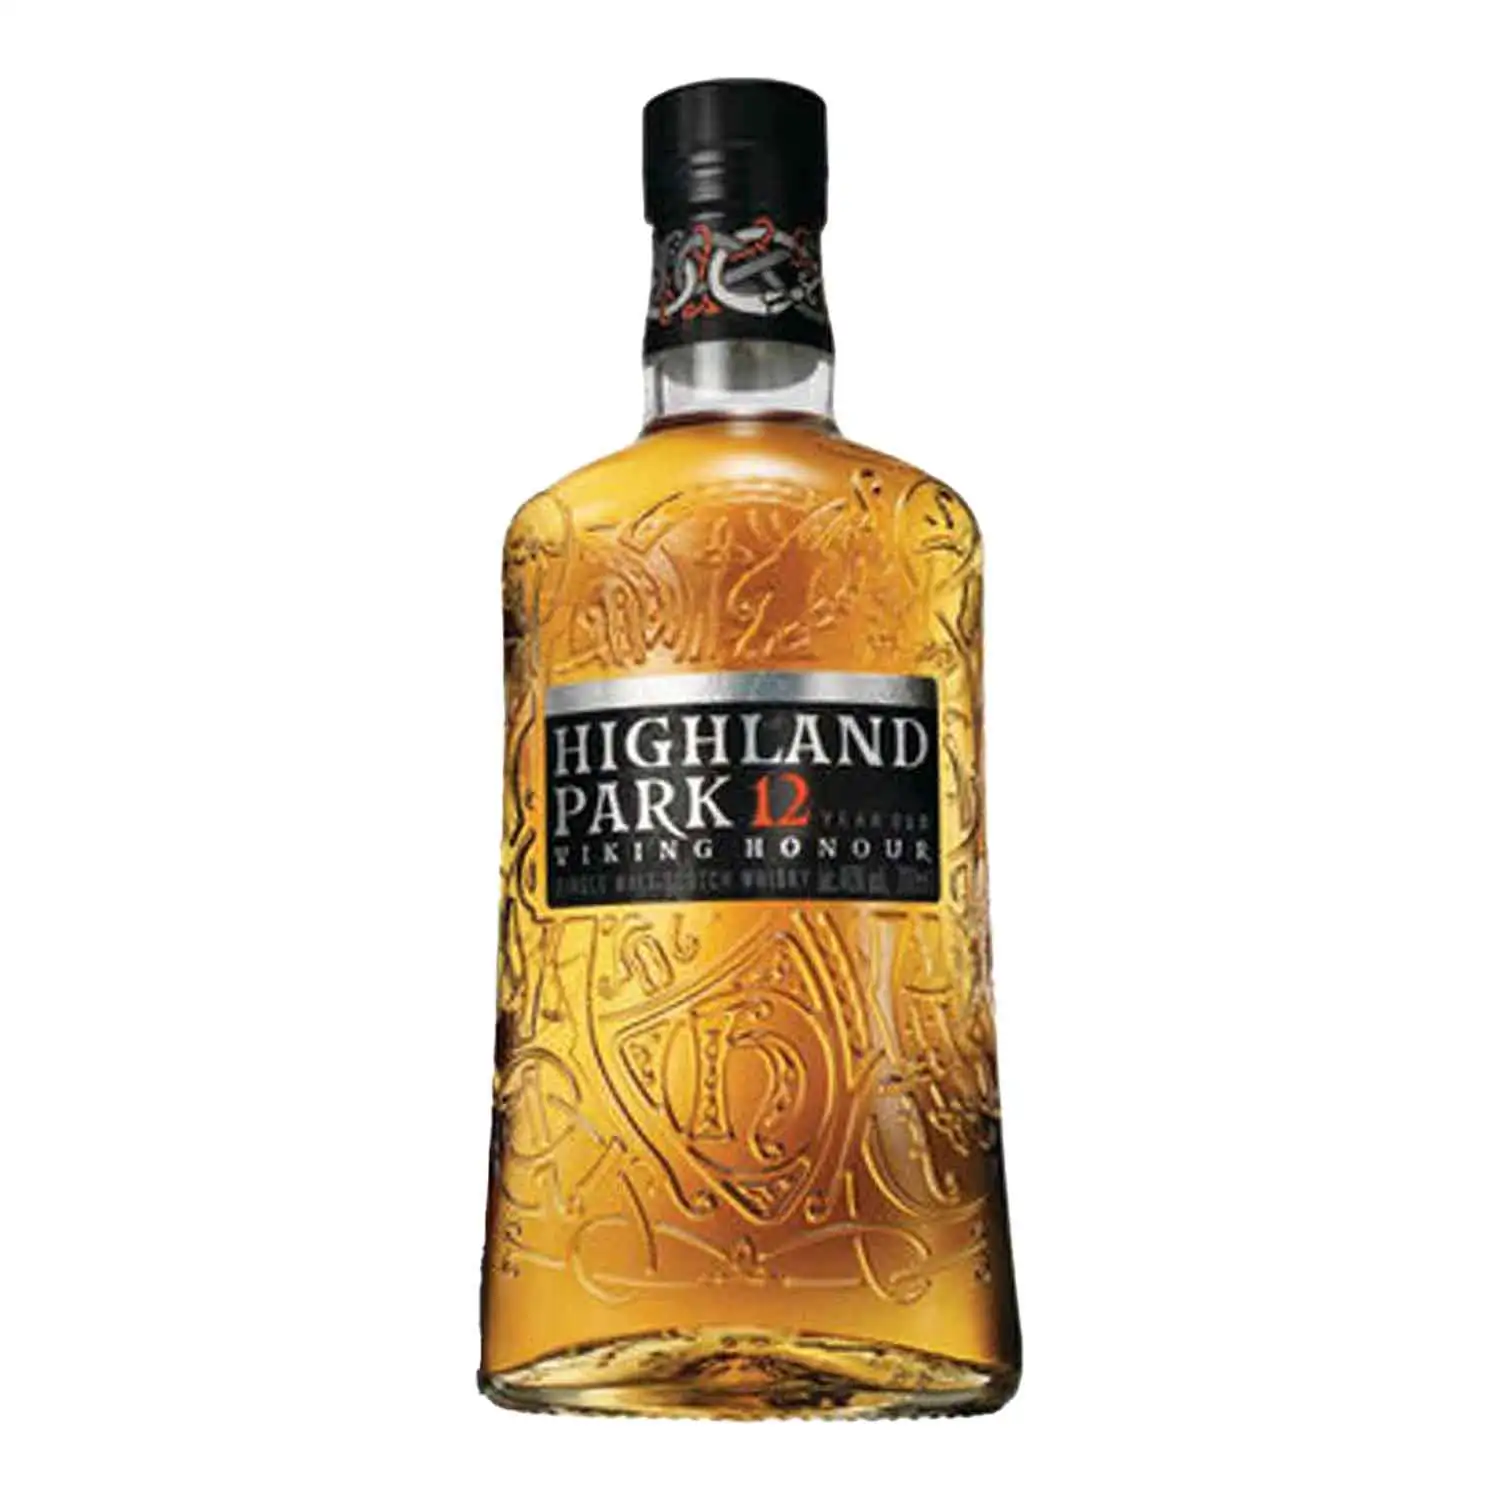 Highland Park 12 year old 70cl Alc 40% - Buy at Real Tobacco